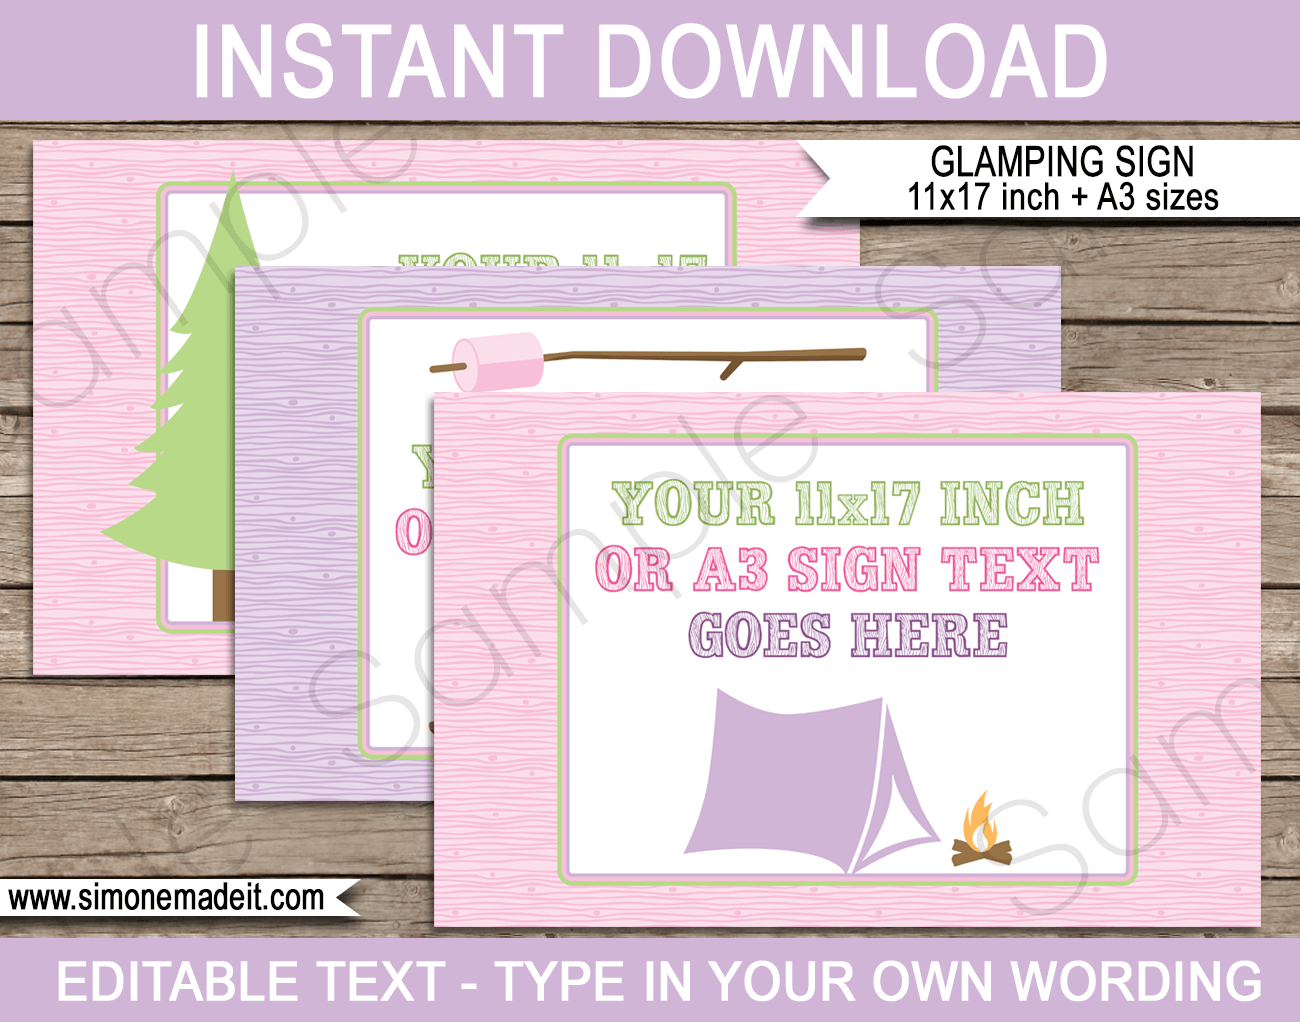 Glamping Party Signs | Editable & Printable DIY Templates | Party Decorations | Tabloid / Ledger 11x17 inches | A3 | $4.00 Instant Download via SIMONEmadeit.com